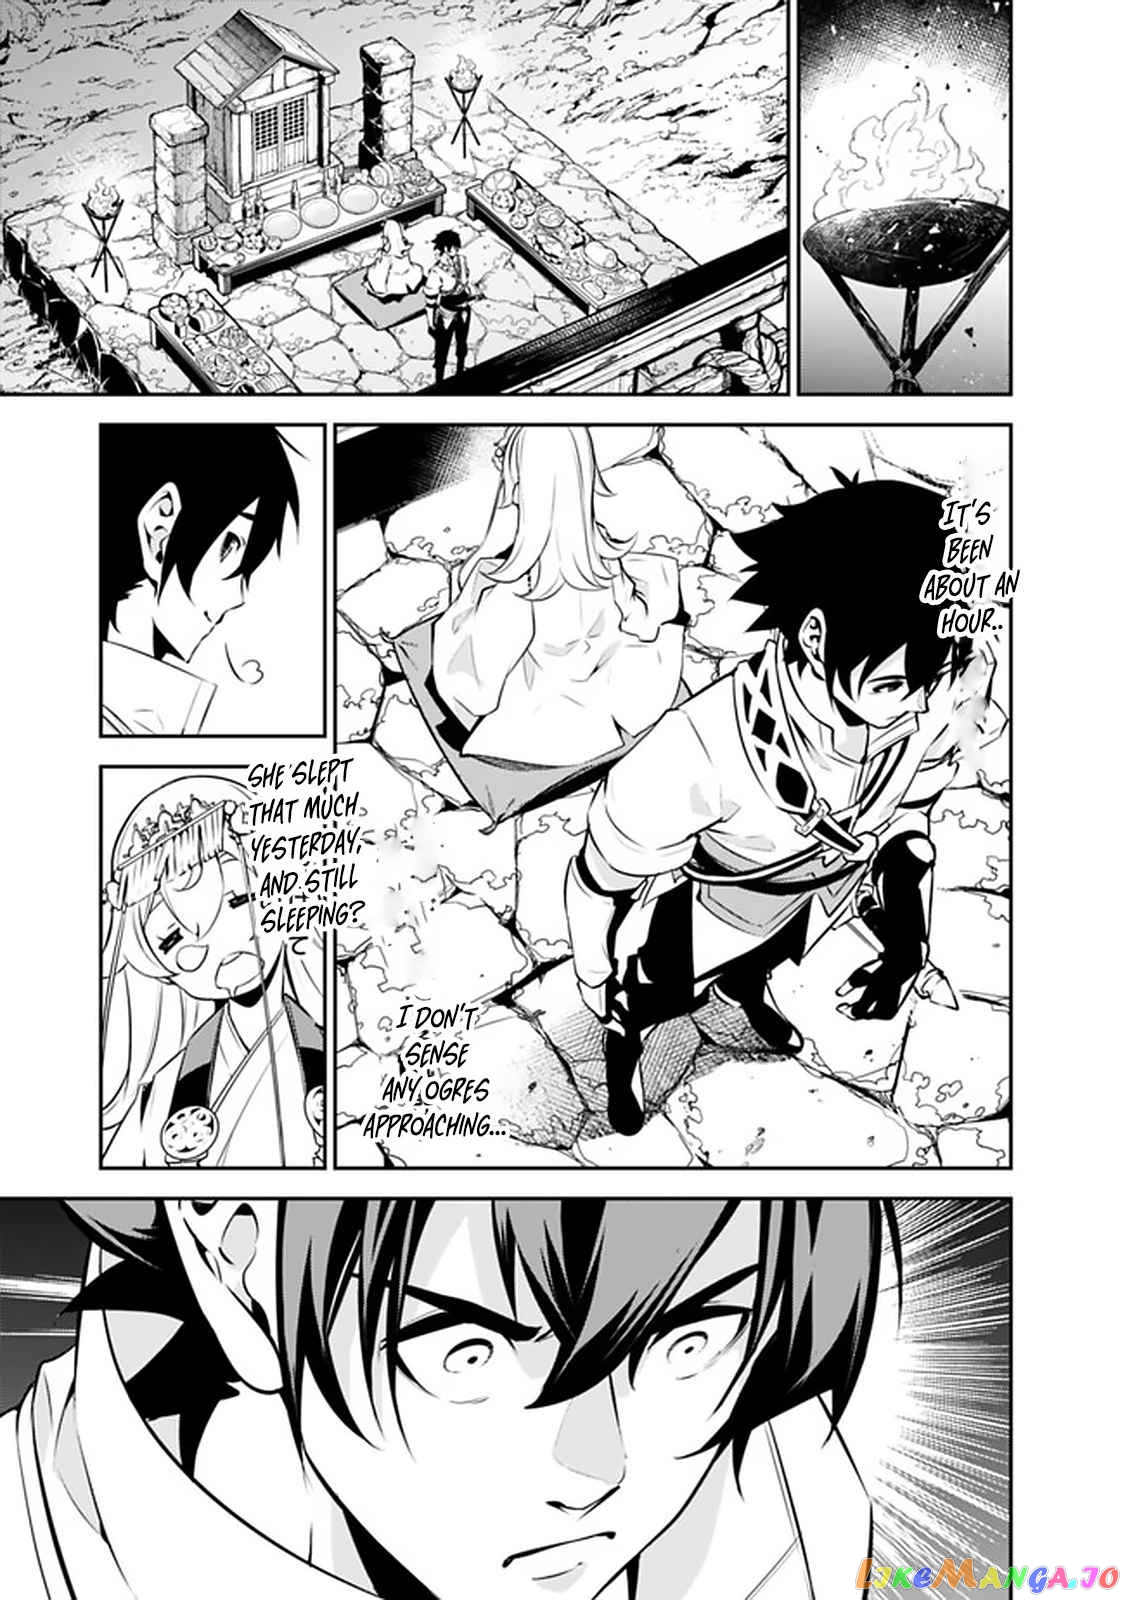 The Strongest Magical Swordsman Ever Reborn As An F-Rank Adventurer. chapter 51 - page 3